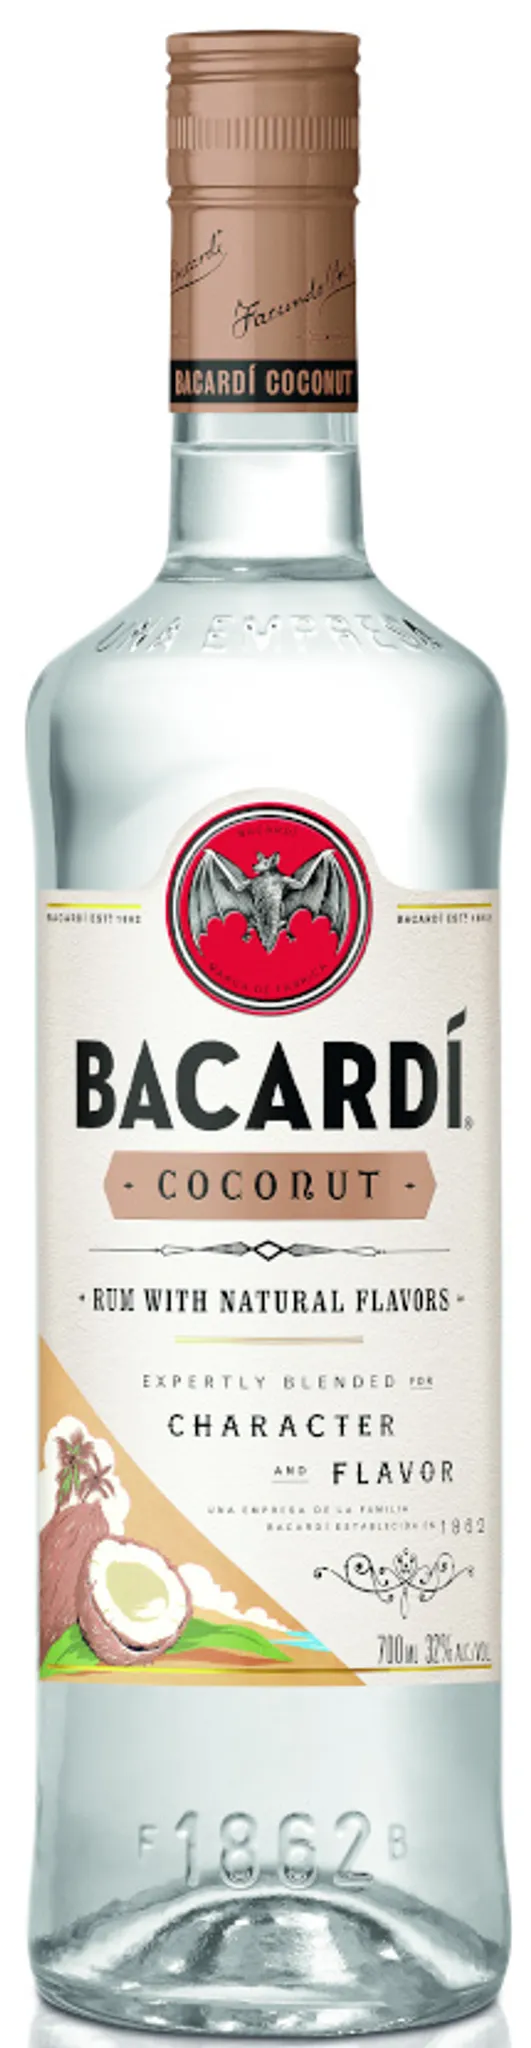 Bacardi Coconut Rum with Natural Flavors | 32